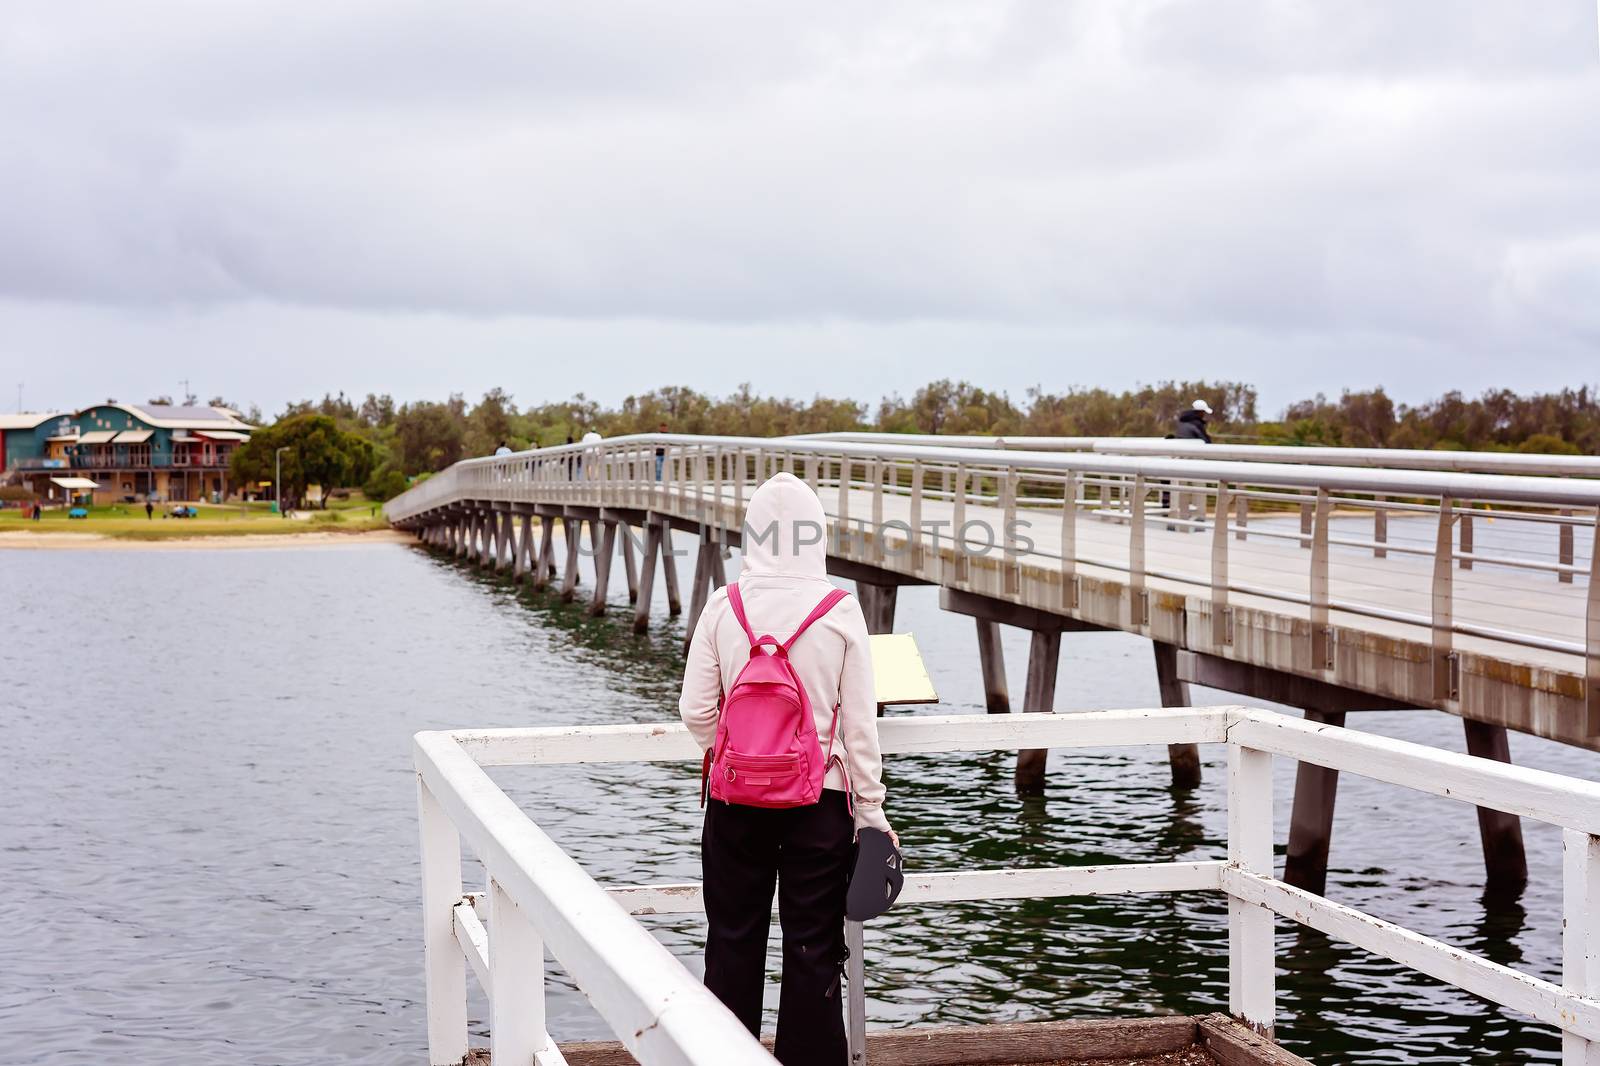 A young person in a pink coat and hood with a pink backpack standing reading a sign on a jetty beside a river